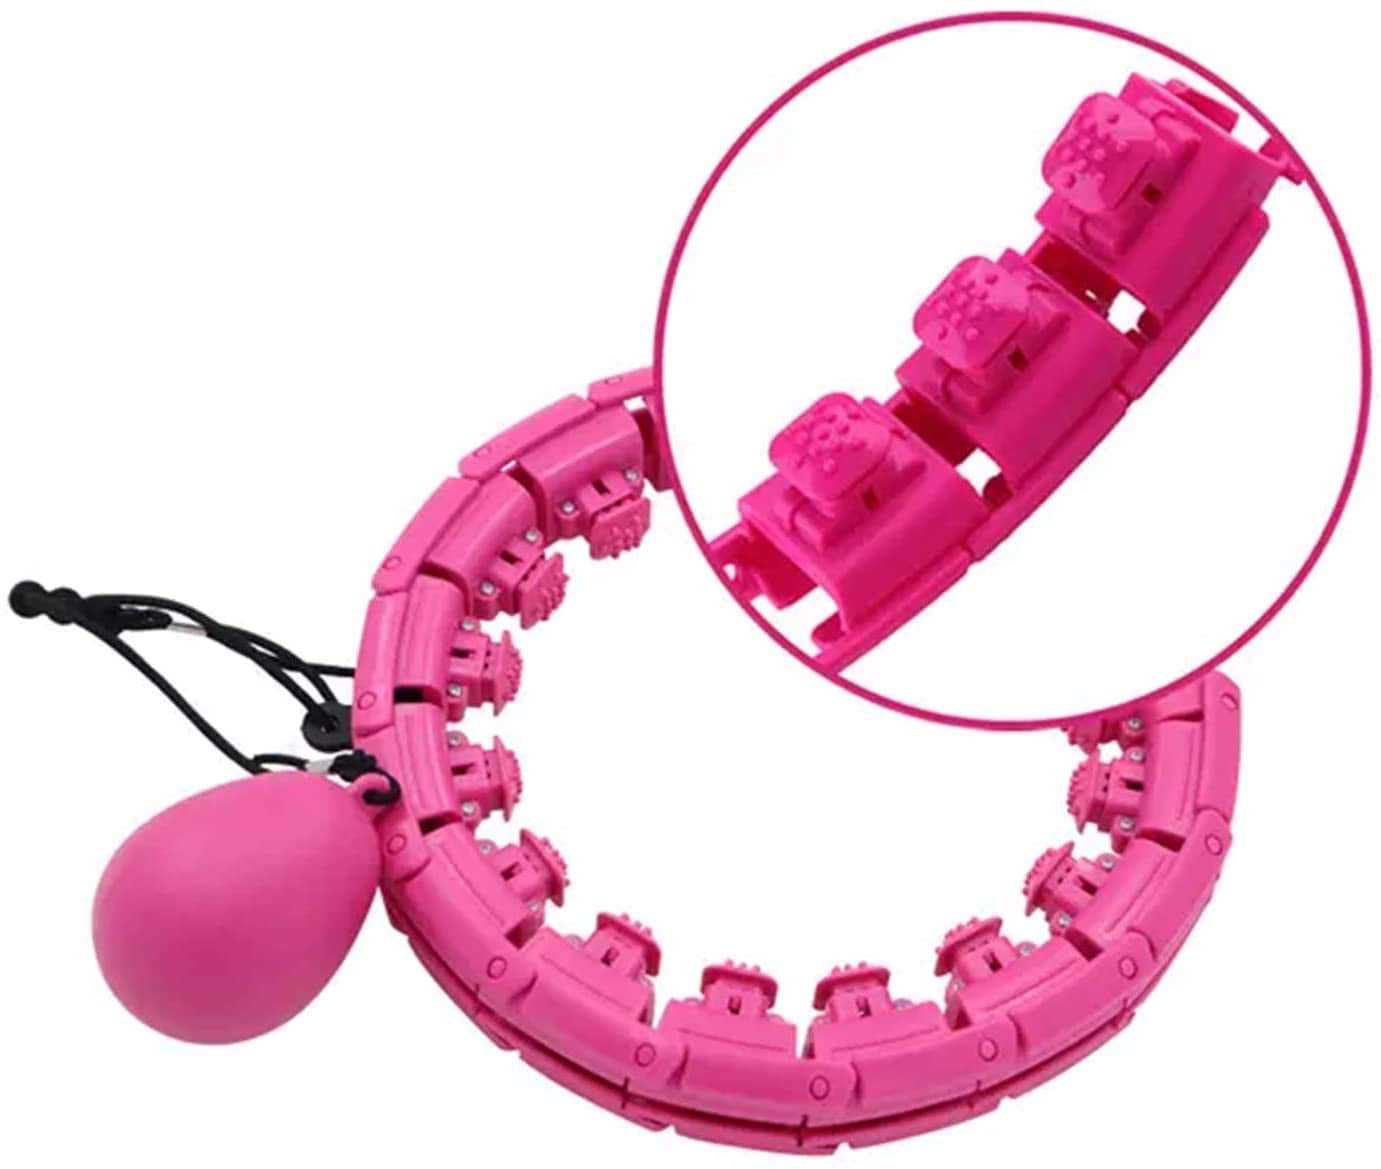 Weighted Smart Hula Hoop That Will not Fall Smart 24 Sections Detachable Hoola Hoop Suitable for Adults and Children 